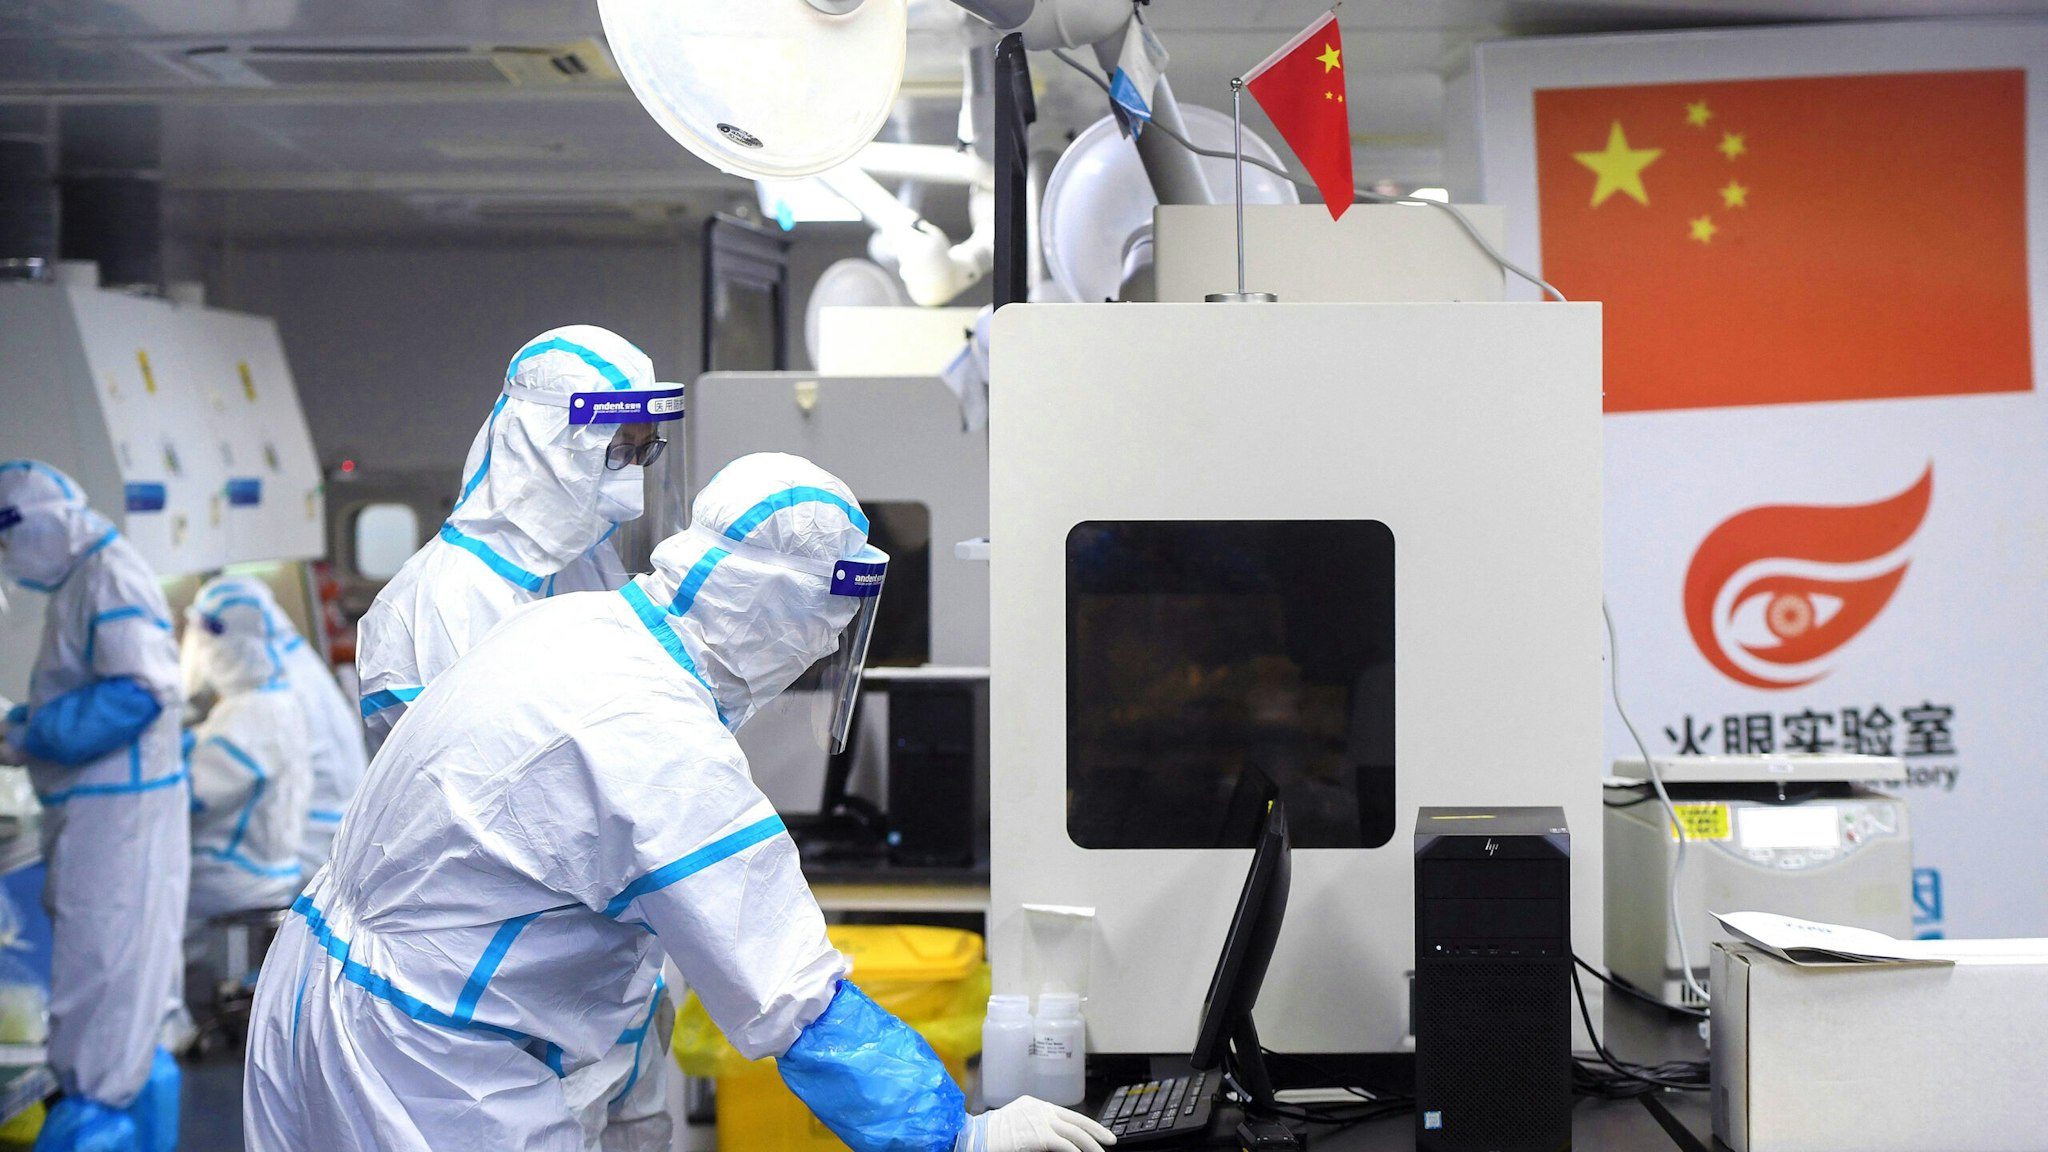 This photo taken on August 4, 2021 shows laboratory technicians wearing personal protective equipment (PPE) working on samples to be tested for the Covid-19 coronavirus at the Fire Eye laboratory, a Covid-19 testing facility, in Wuhan in China's central Hubei province. - China OUT